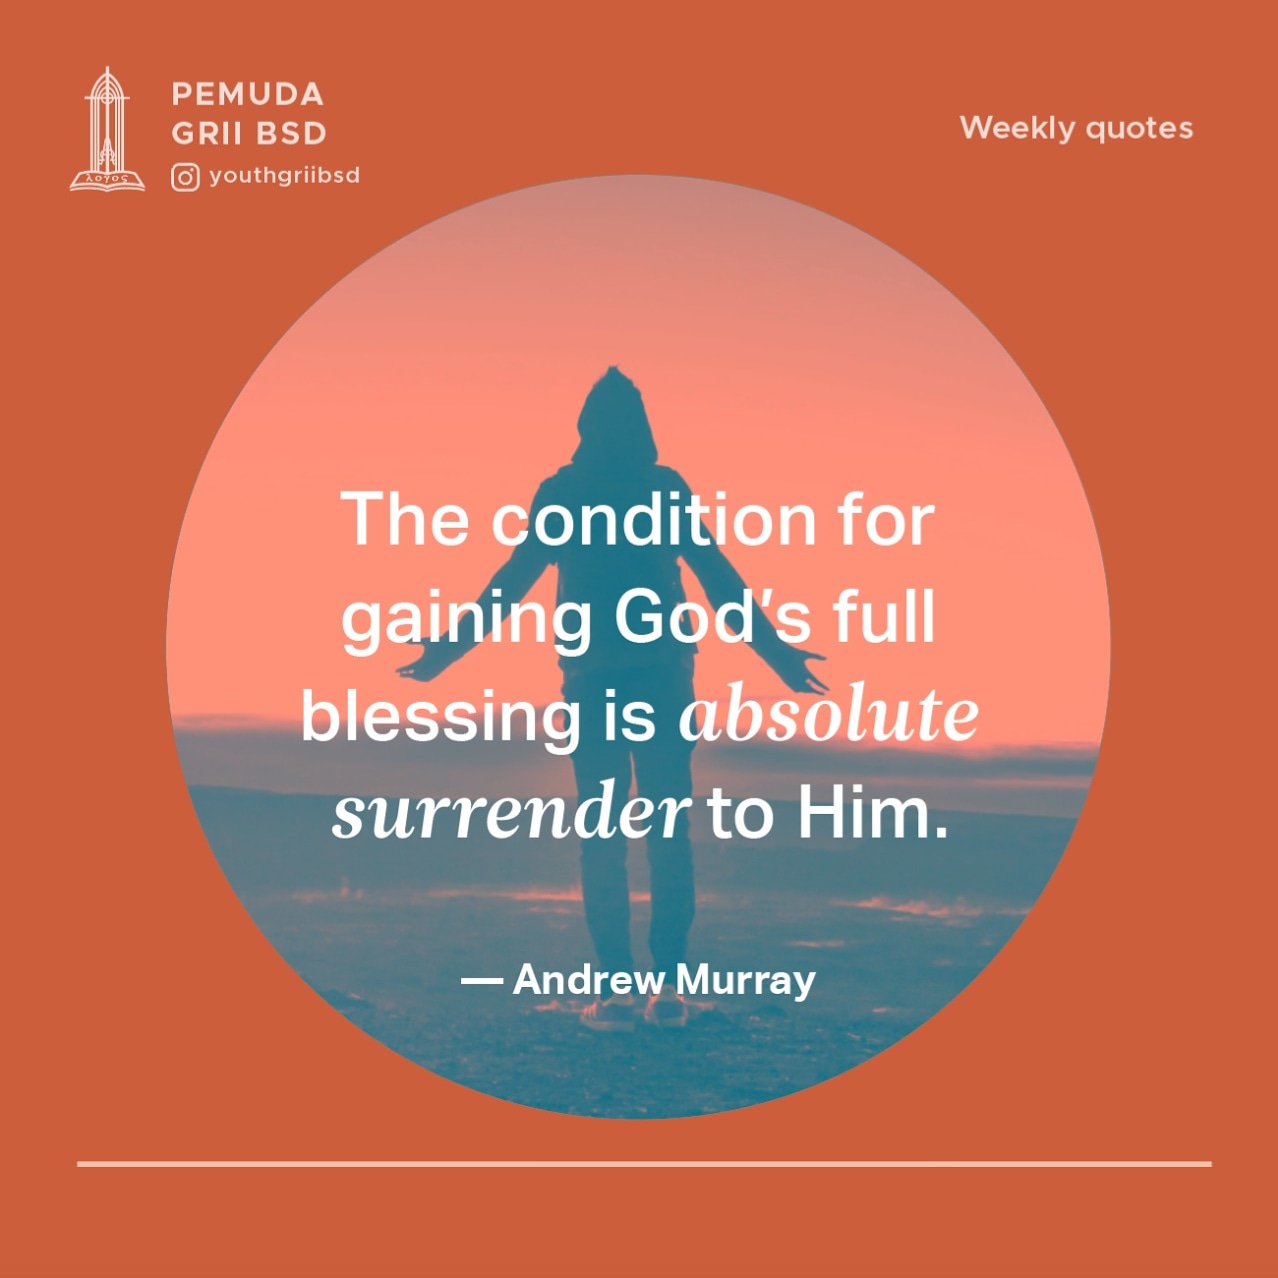 The condition for gaining God's full blessing is absolute surrender to Him.